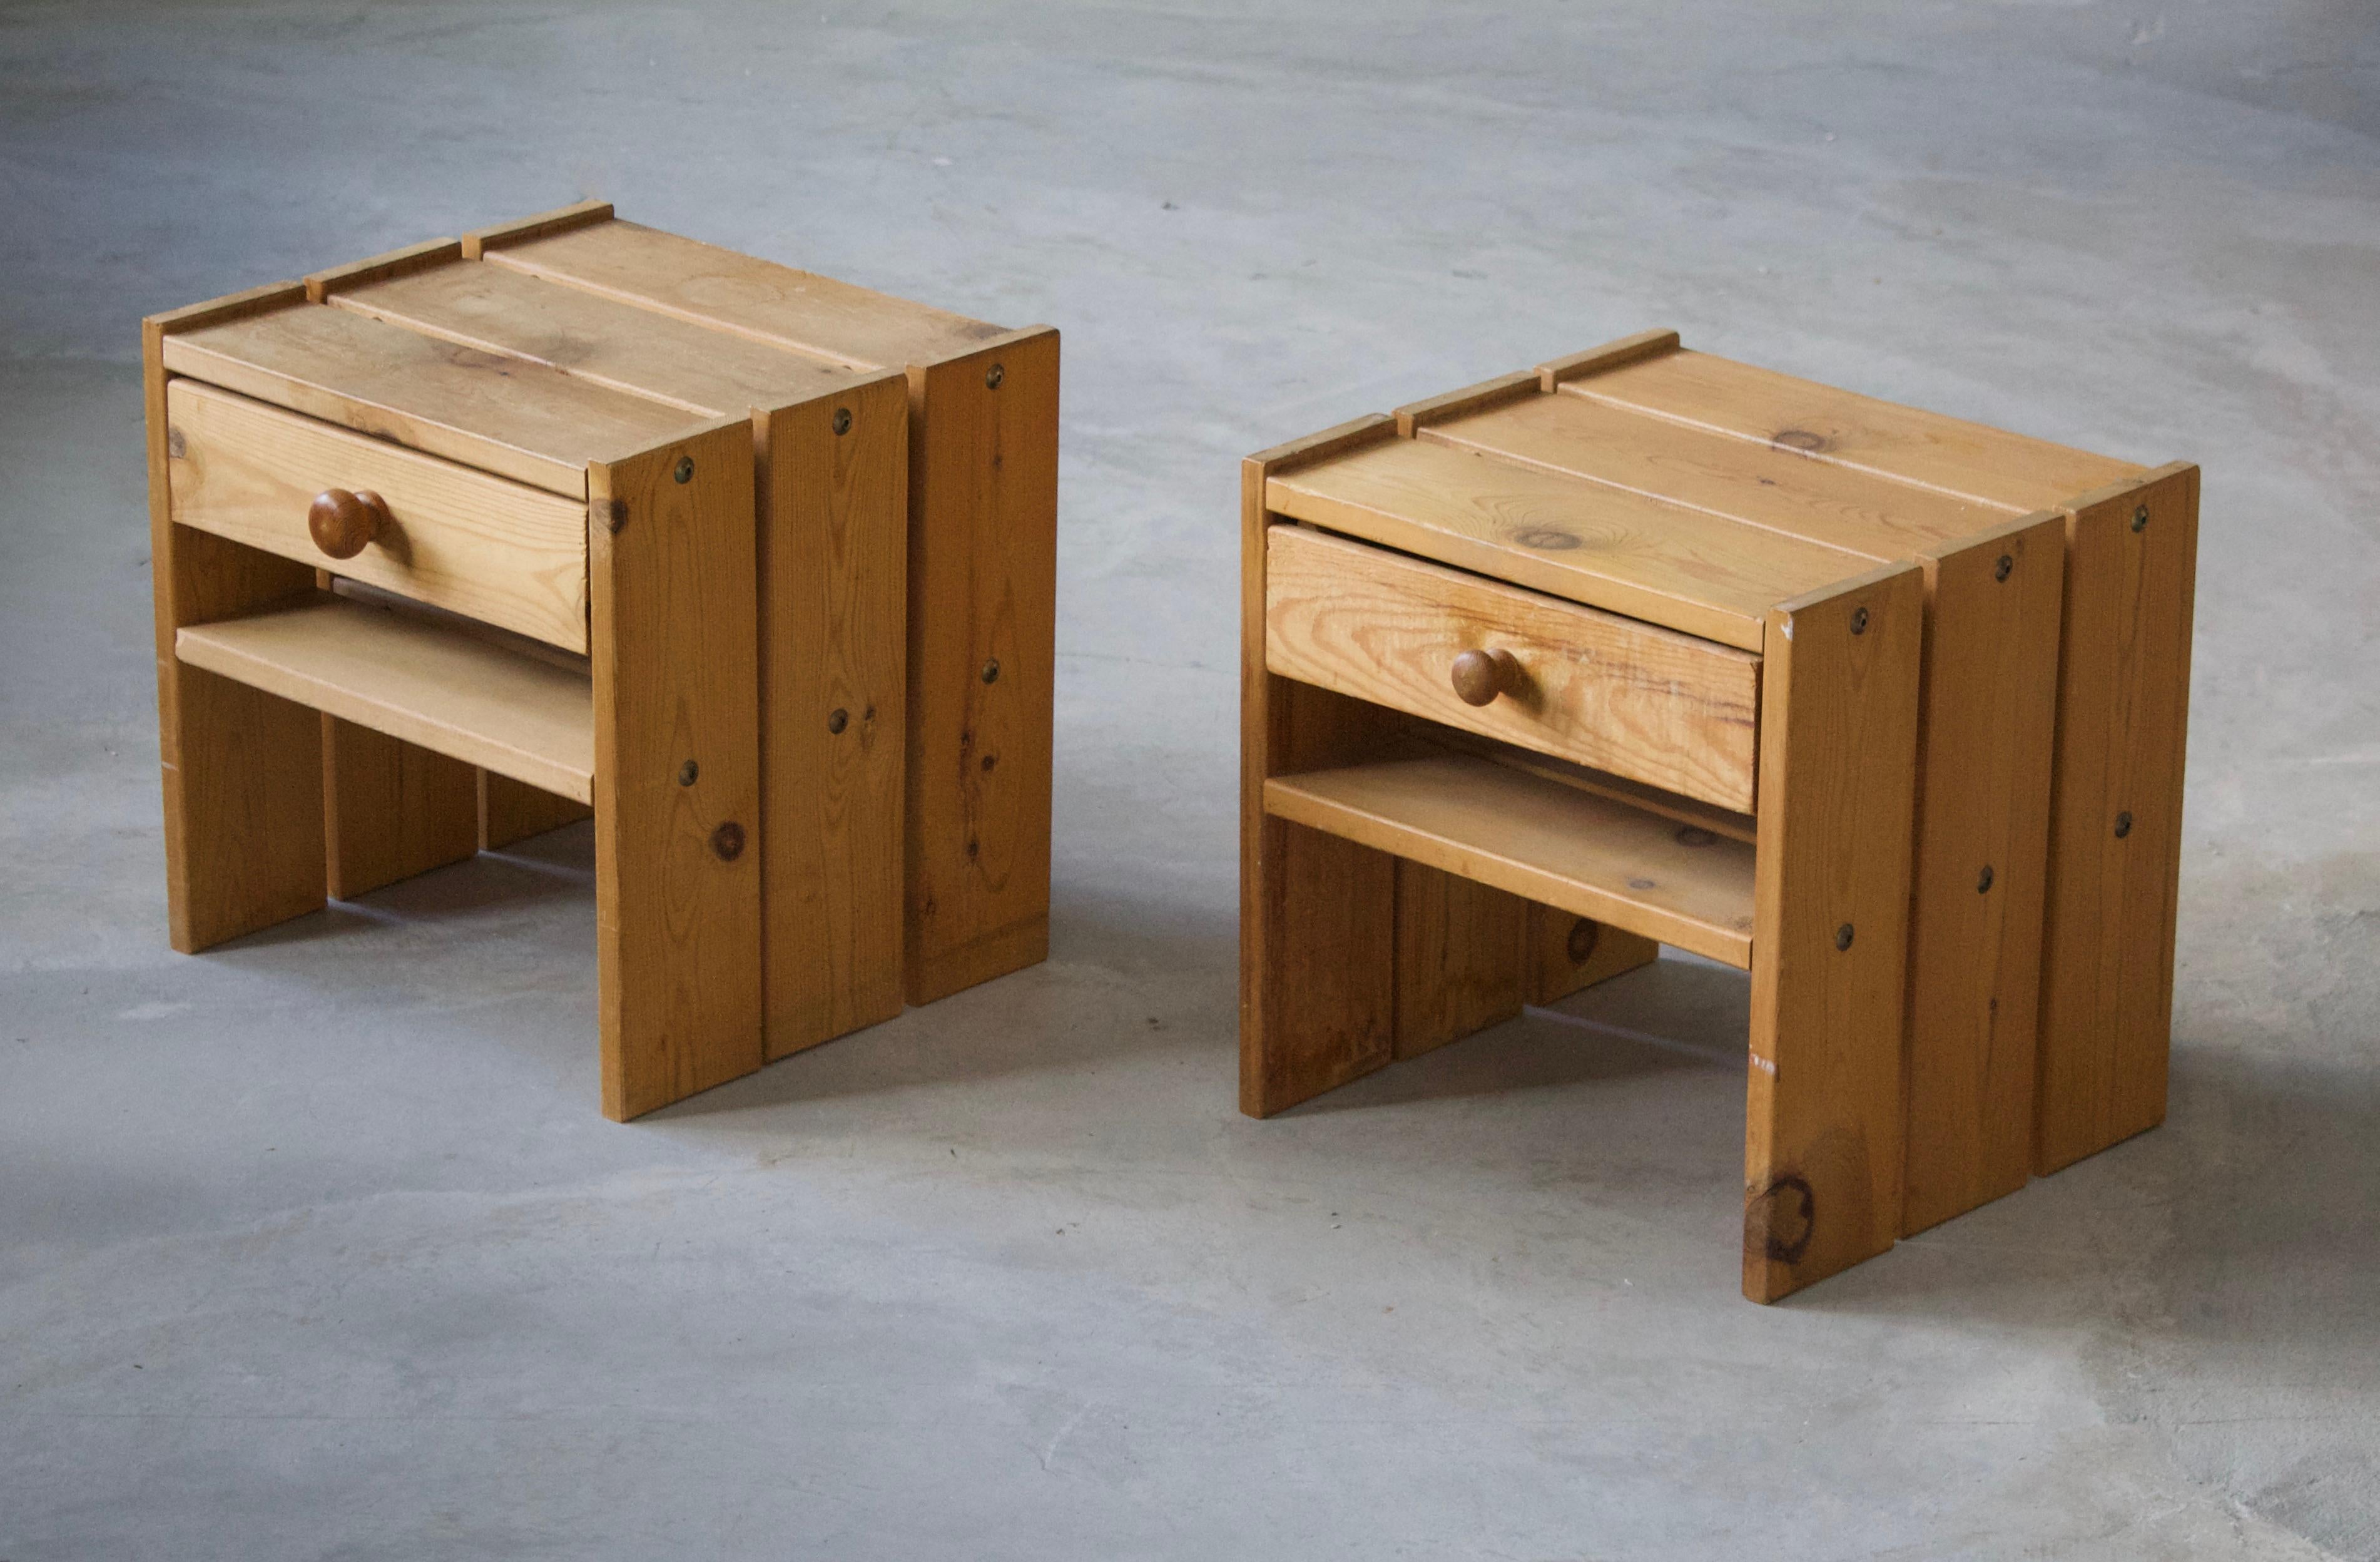 A set of bedside cabinets / tables / nightstands. Designed and produced in Denmark, 1970s. In solid pine.

Other designers working in similar style and materials include Axel Einar Hjorth, Roland Wilhelmsson, Pierre Chapo, and Charlotte Perriand.